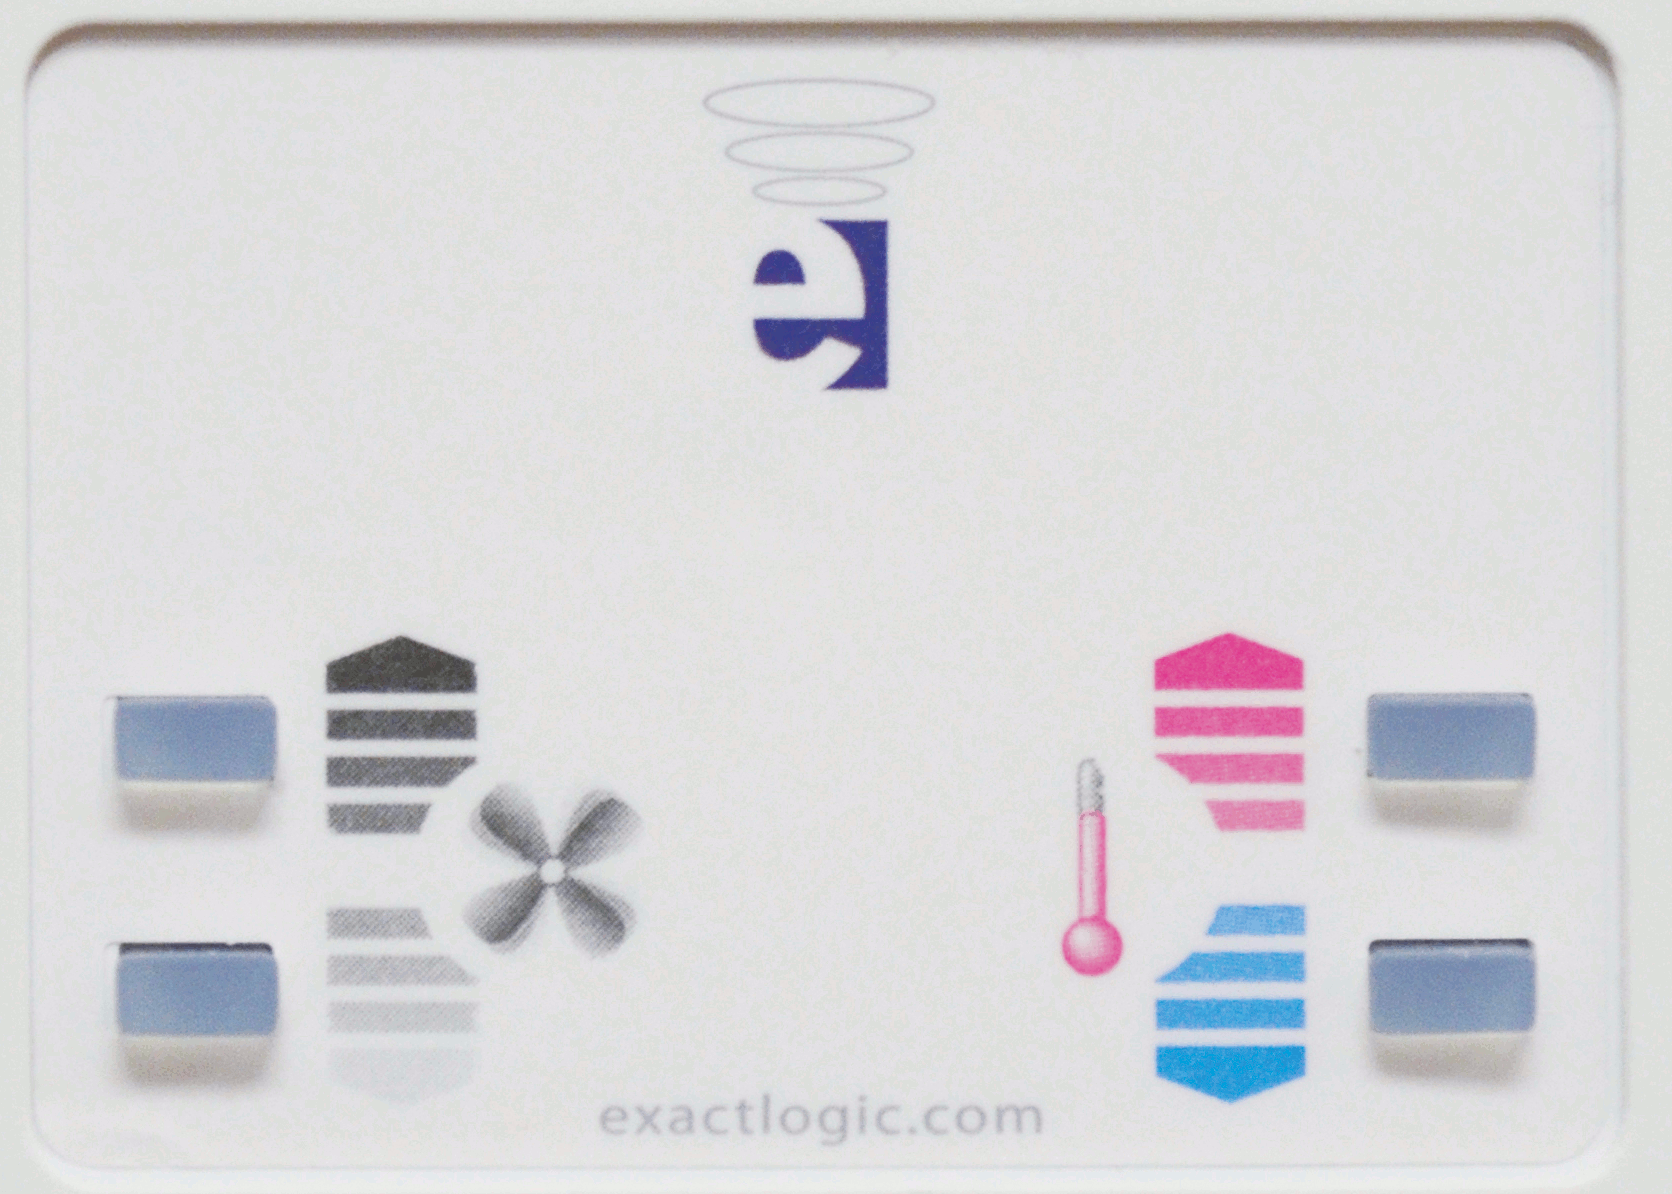 100 Custom Labels for ExactLogic Thermostats